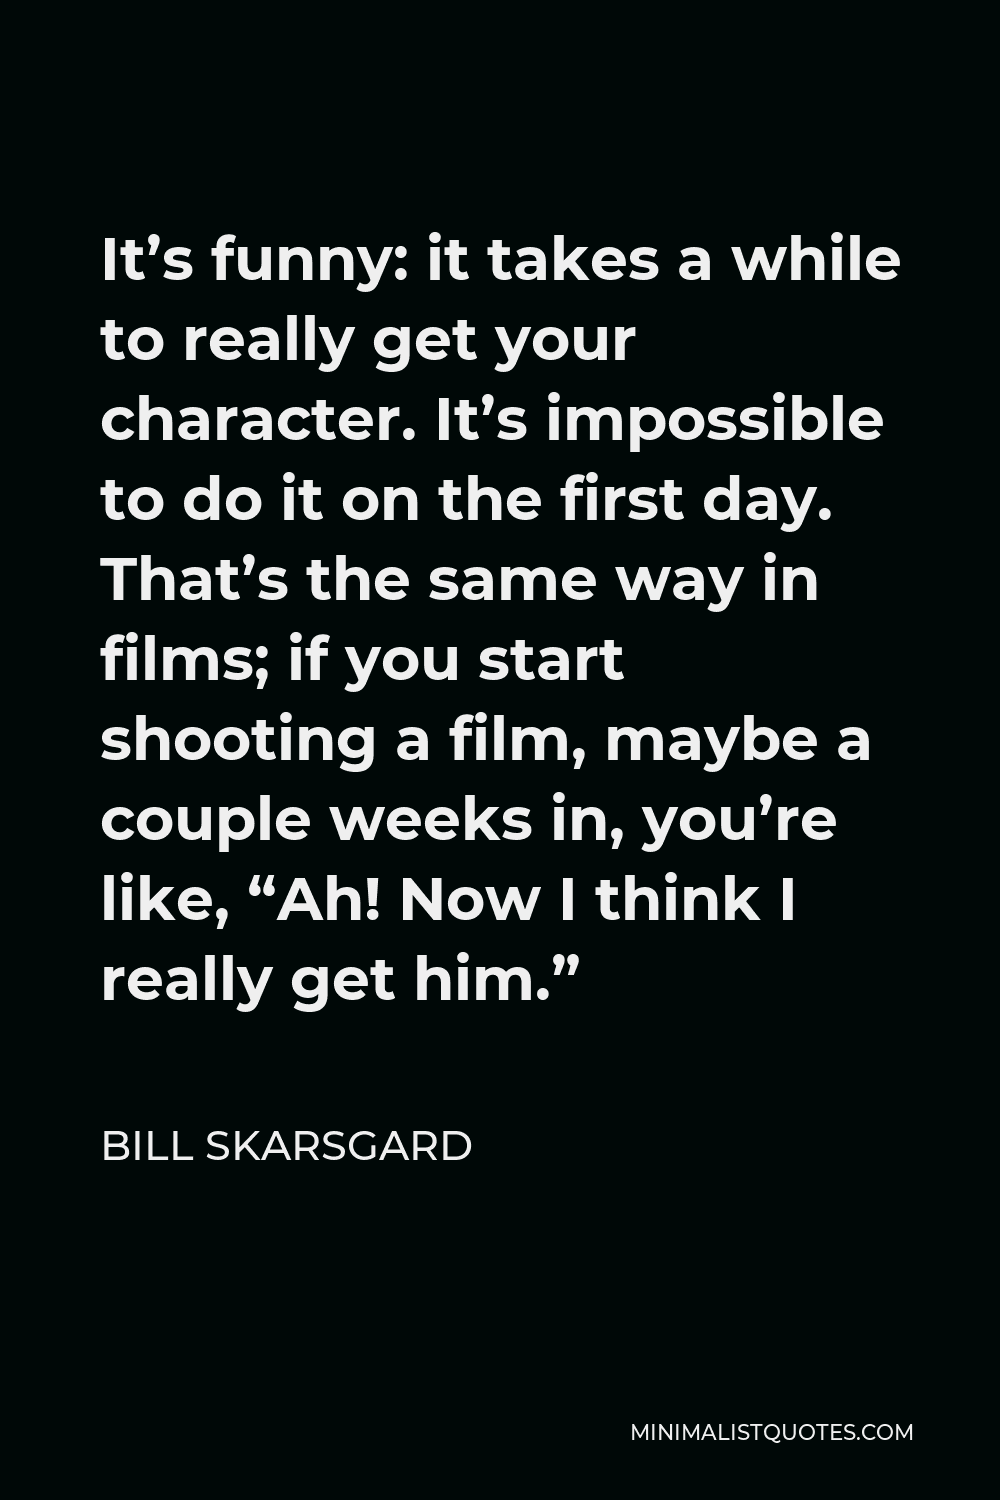 Bill Skarsgard Quote - It’s funny: it takes a while to really get your character. It’s impossible to do it on the first day. That’s the same way in films; if you start shooting a film, maybe a couple weeks in, you’re like, “Ah! Now I think I really get him.”